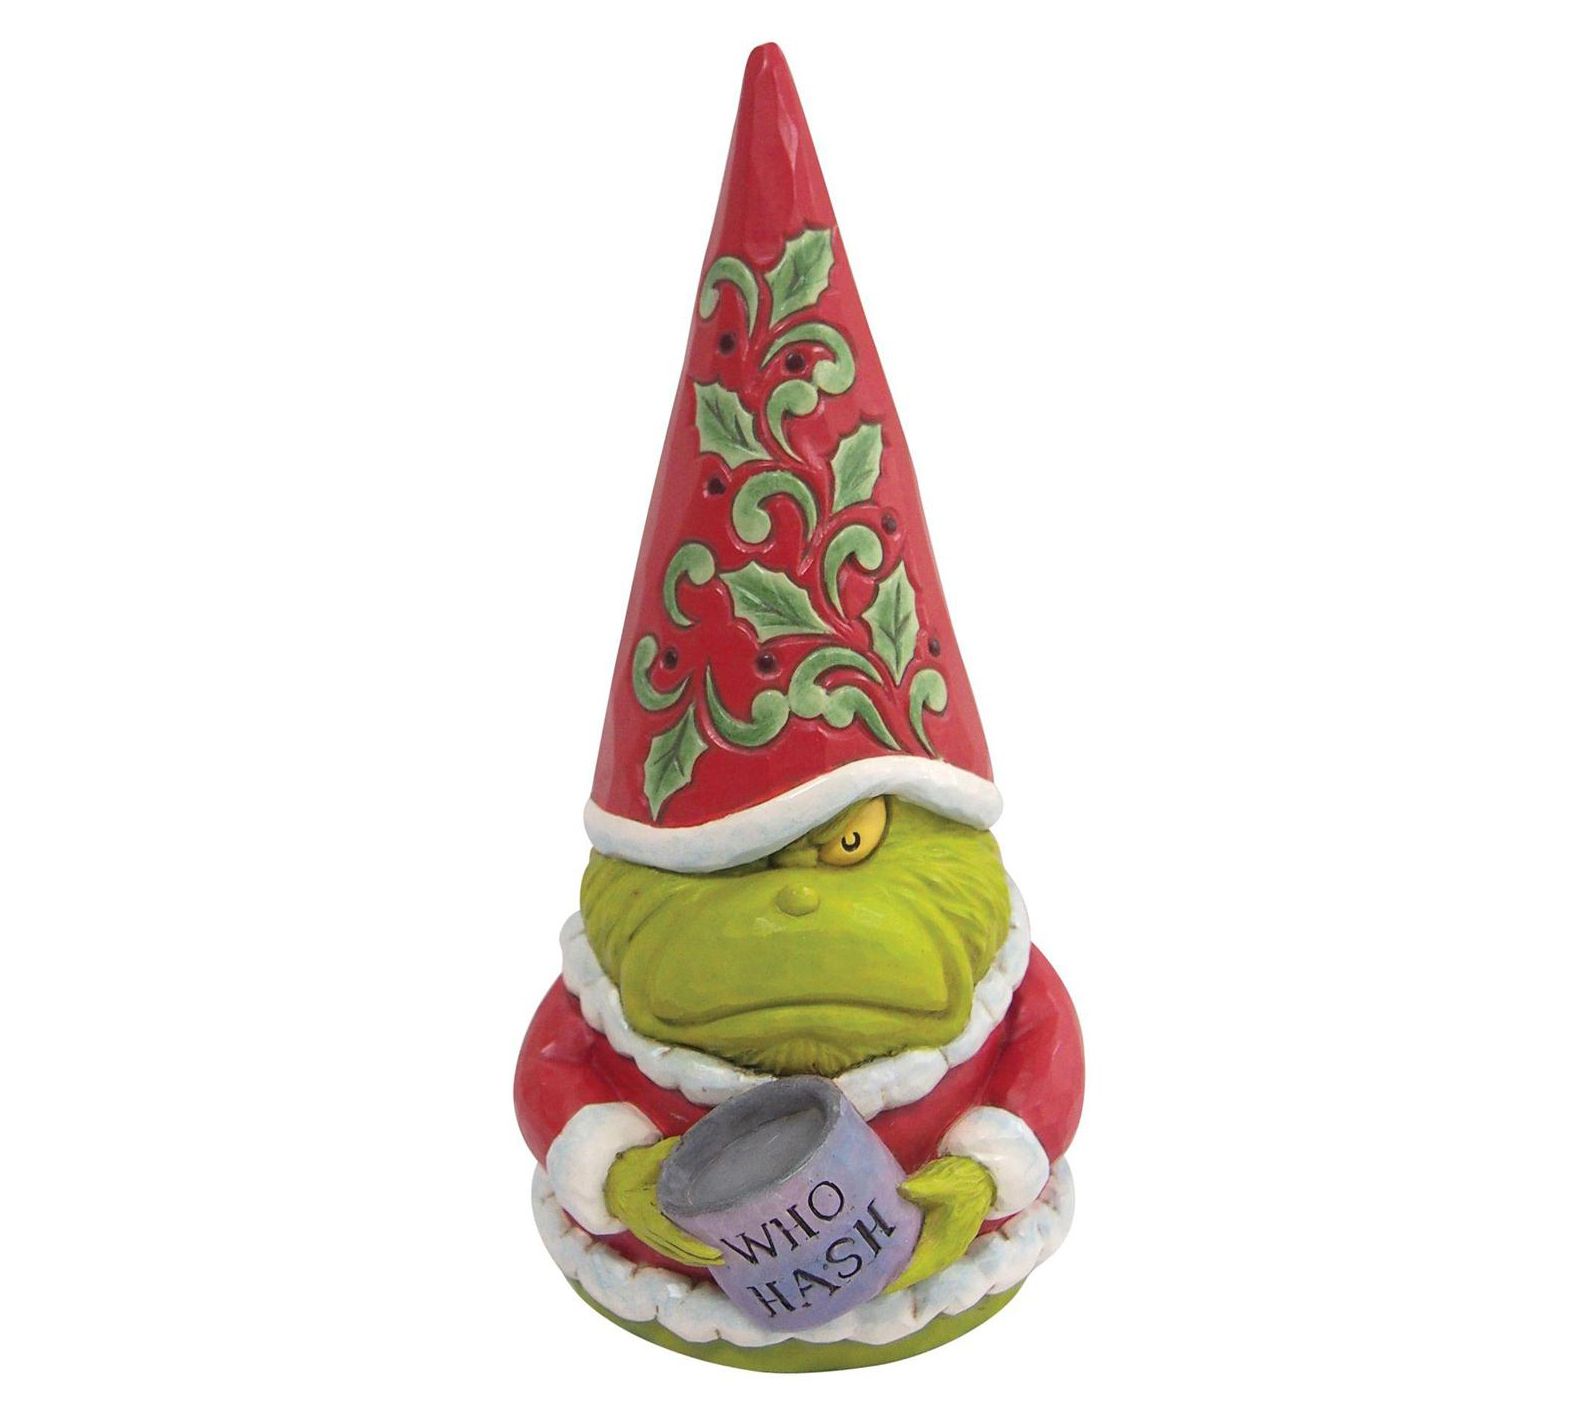  Enesco Jim Shore Dr. Seuss The Grinch with Friends in